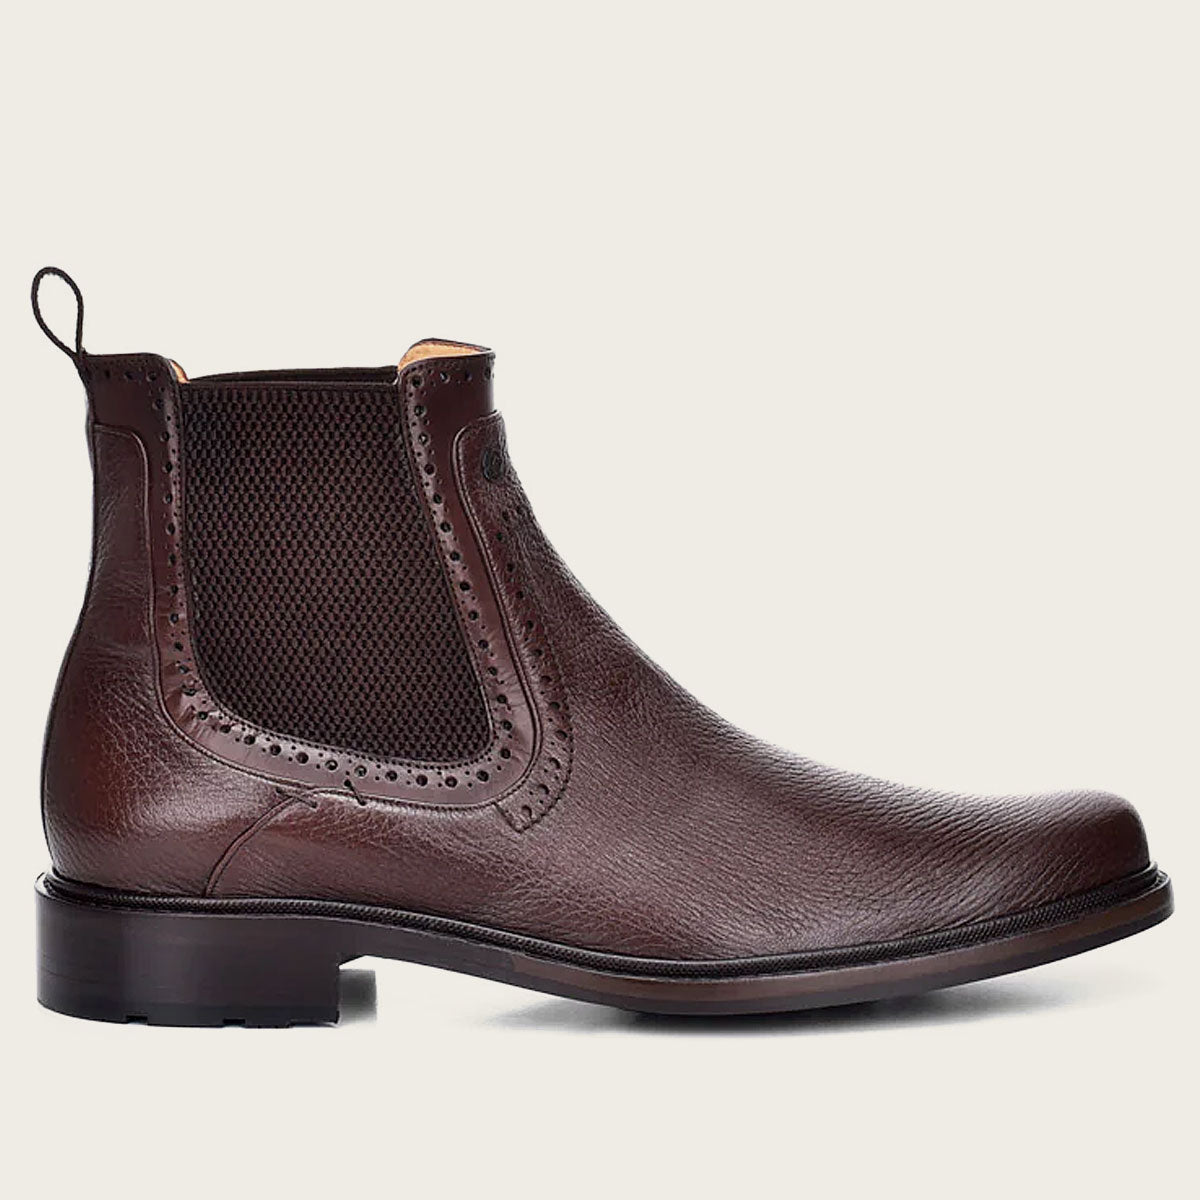 Image of a sleek and minimalistic brown deer bootie, made from genuine deerskin for a comfortable and stylish fit.